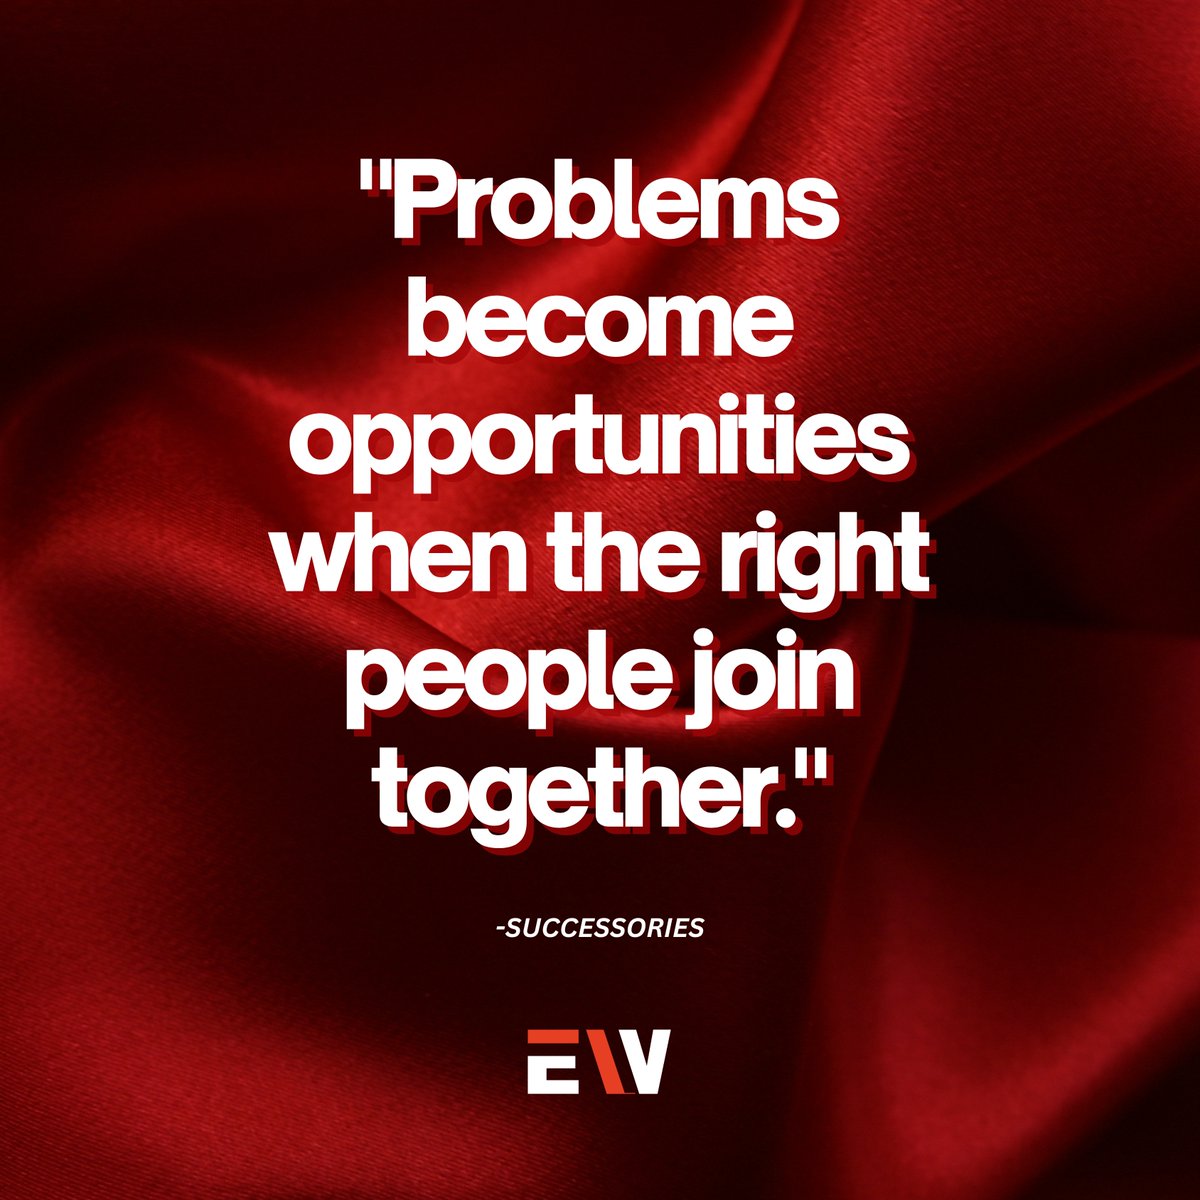 By bringing together the right people, we can turn the problems into opportunities.

Follow @enterprisewired for more.

#teamworktransforms #problemsolvers #opportunityknocks #TogetherWeCan #CollaborationWins #rightpeoplerightresults #TurnChallengesIntoOpportunities